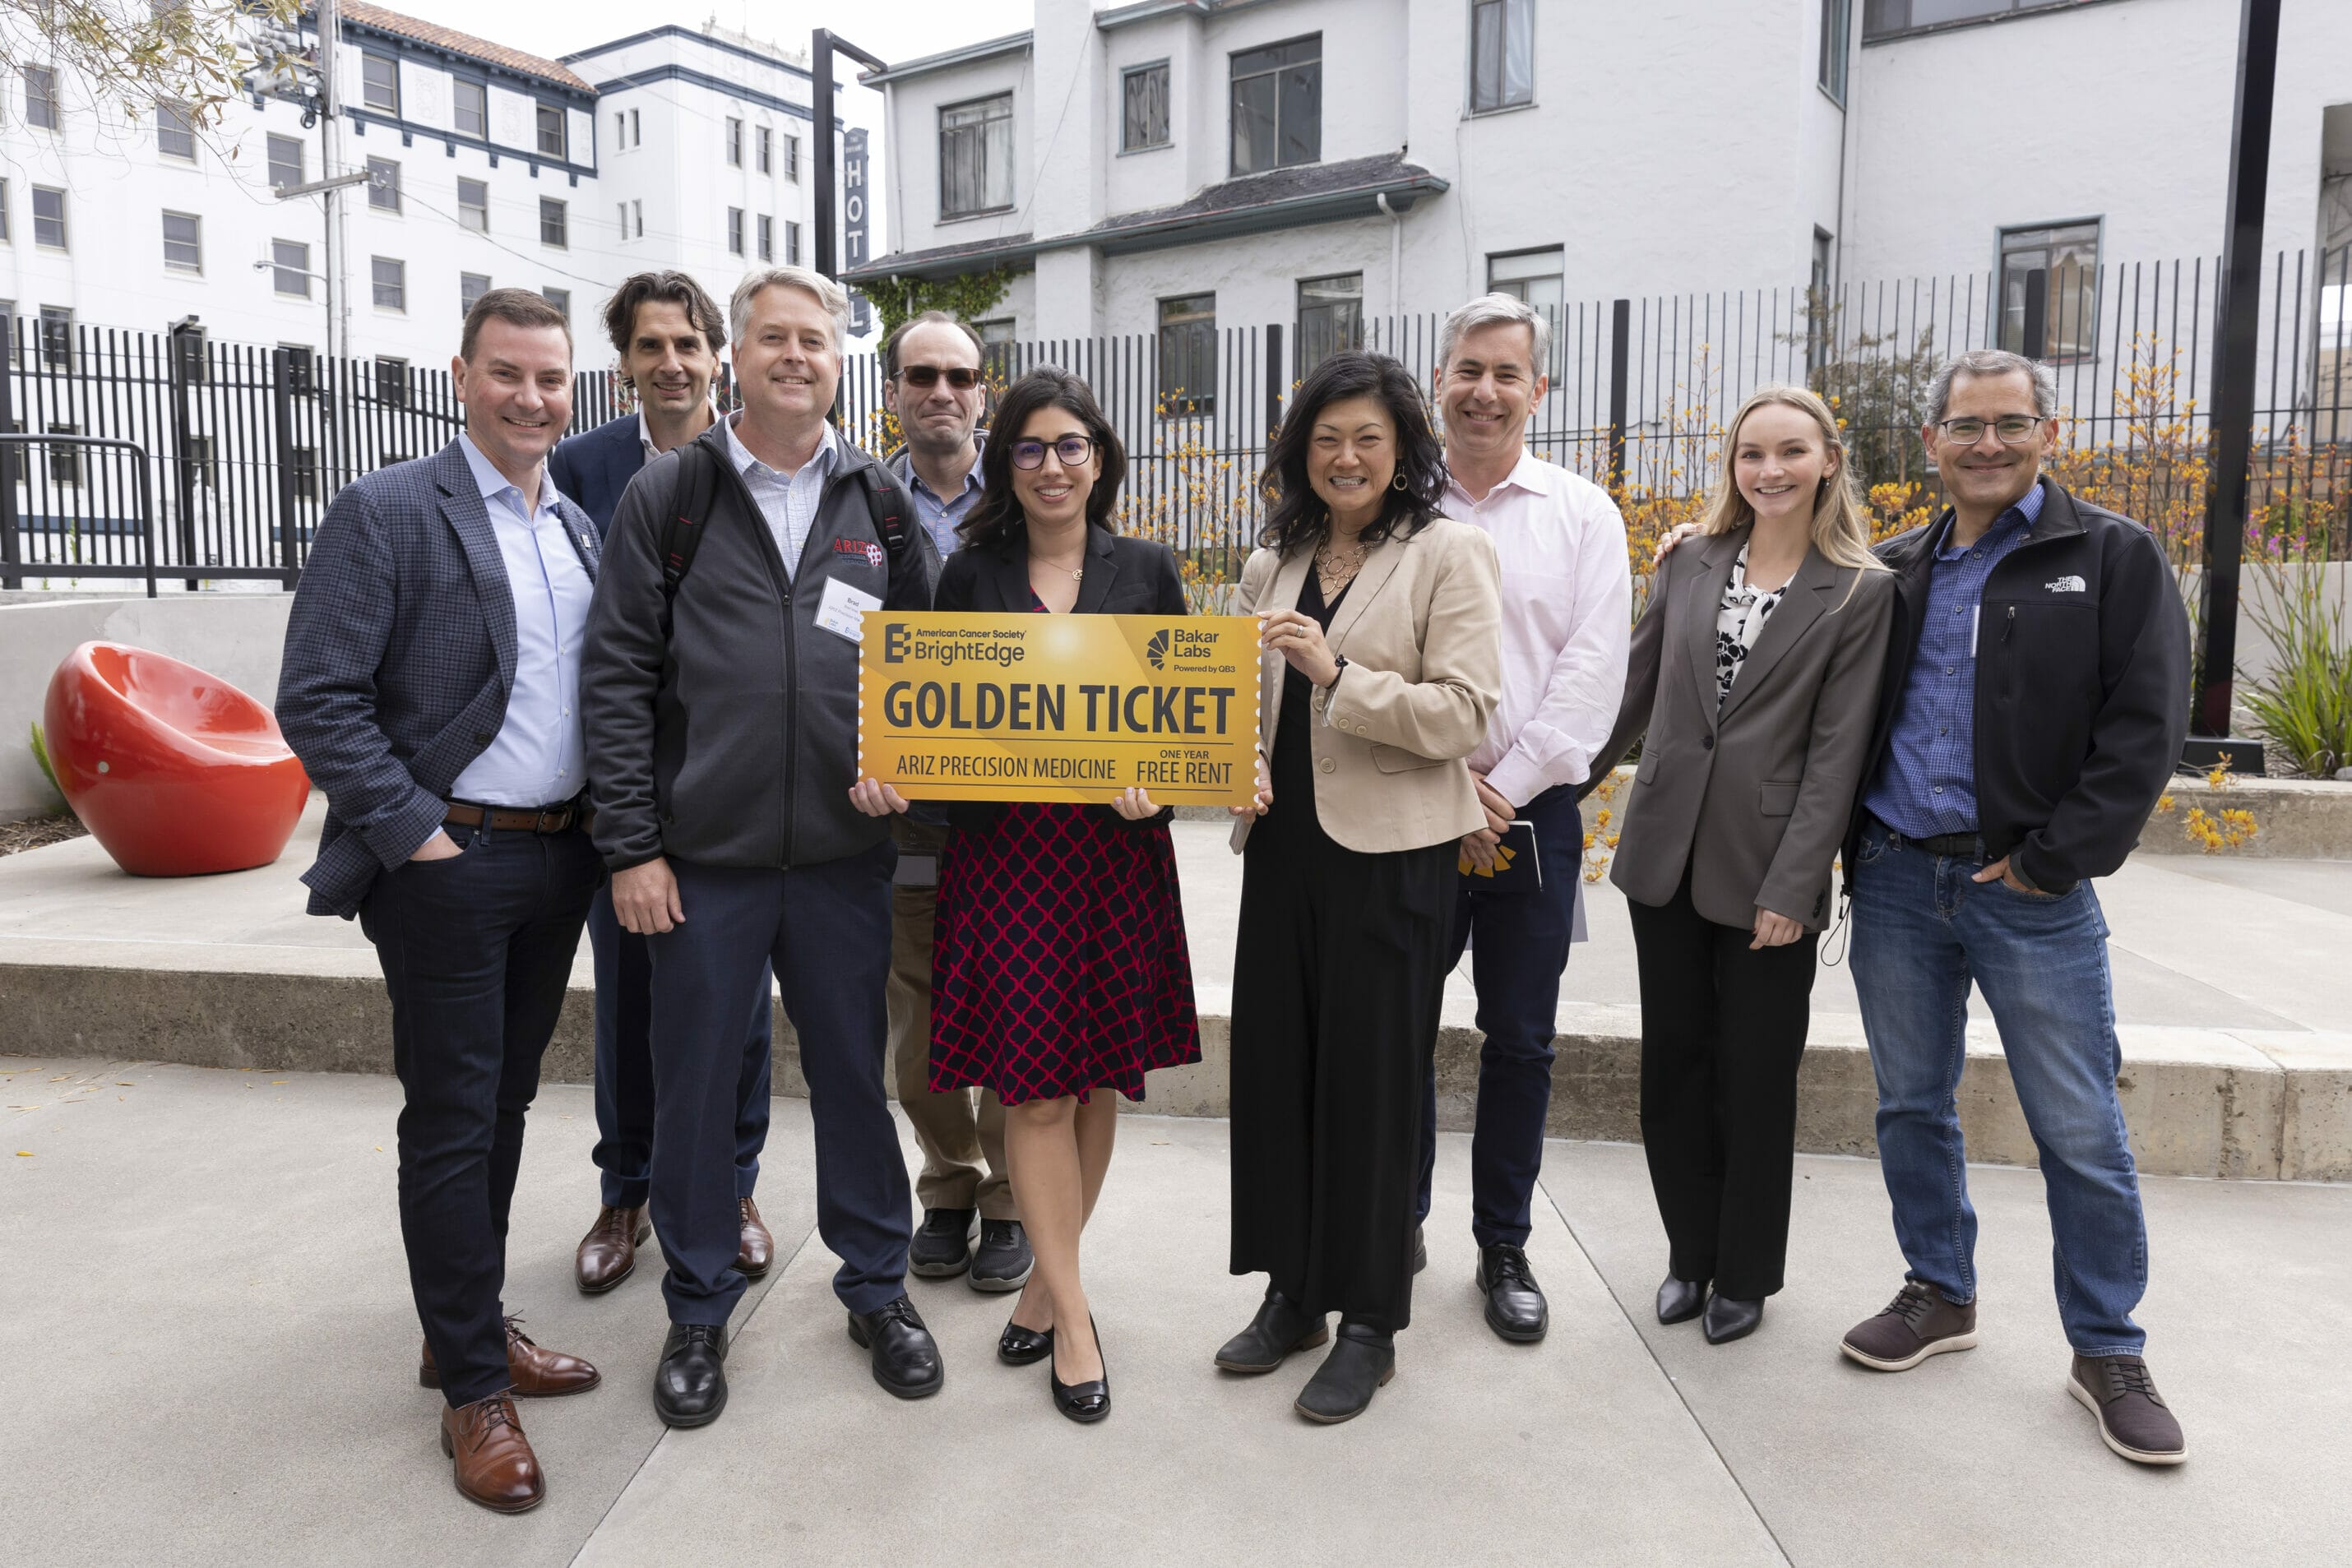 BrightEdge's Farnaz Bakshi (center) presents Golden Ticket to Brad Niles, CEO of ARIZ (third from left) along with the BrightEdge and Bakar Labs teams